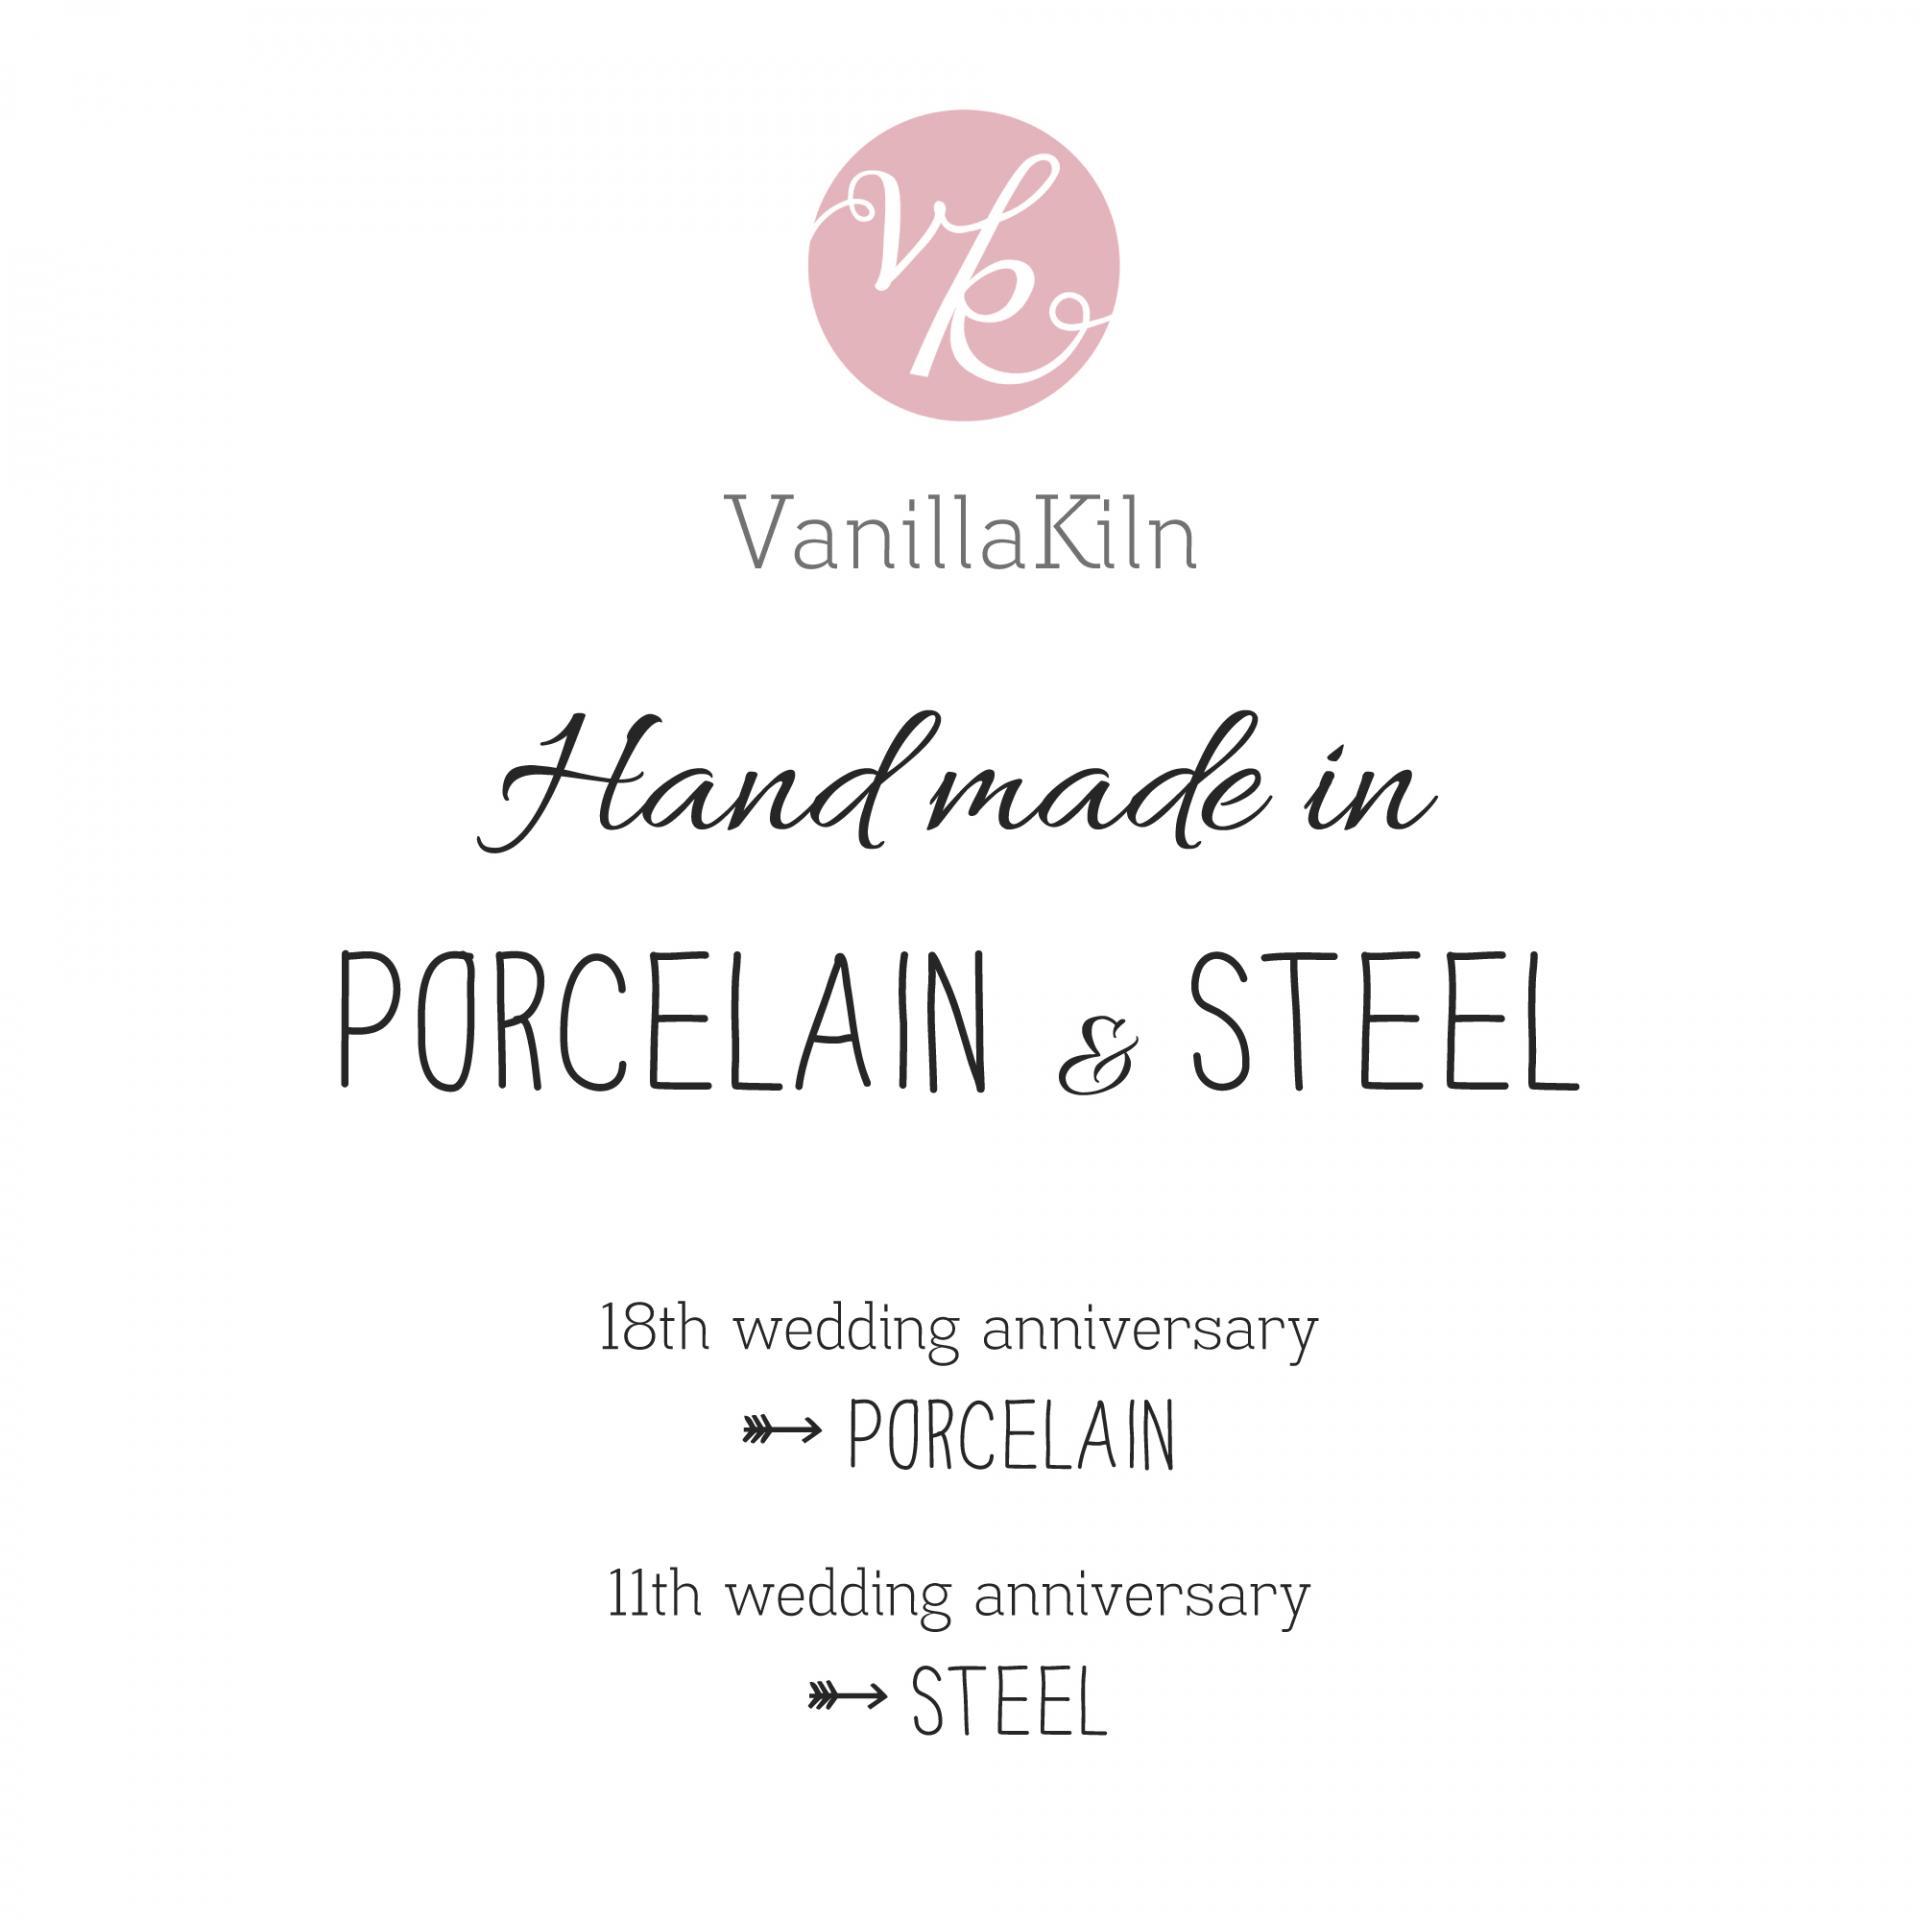  Vanillakiln jewellery, hand made porcelain and steel, 18th anniversary is porcelain, 11th anniversary is steel